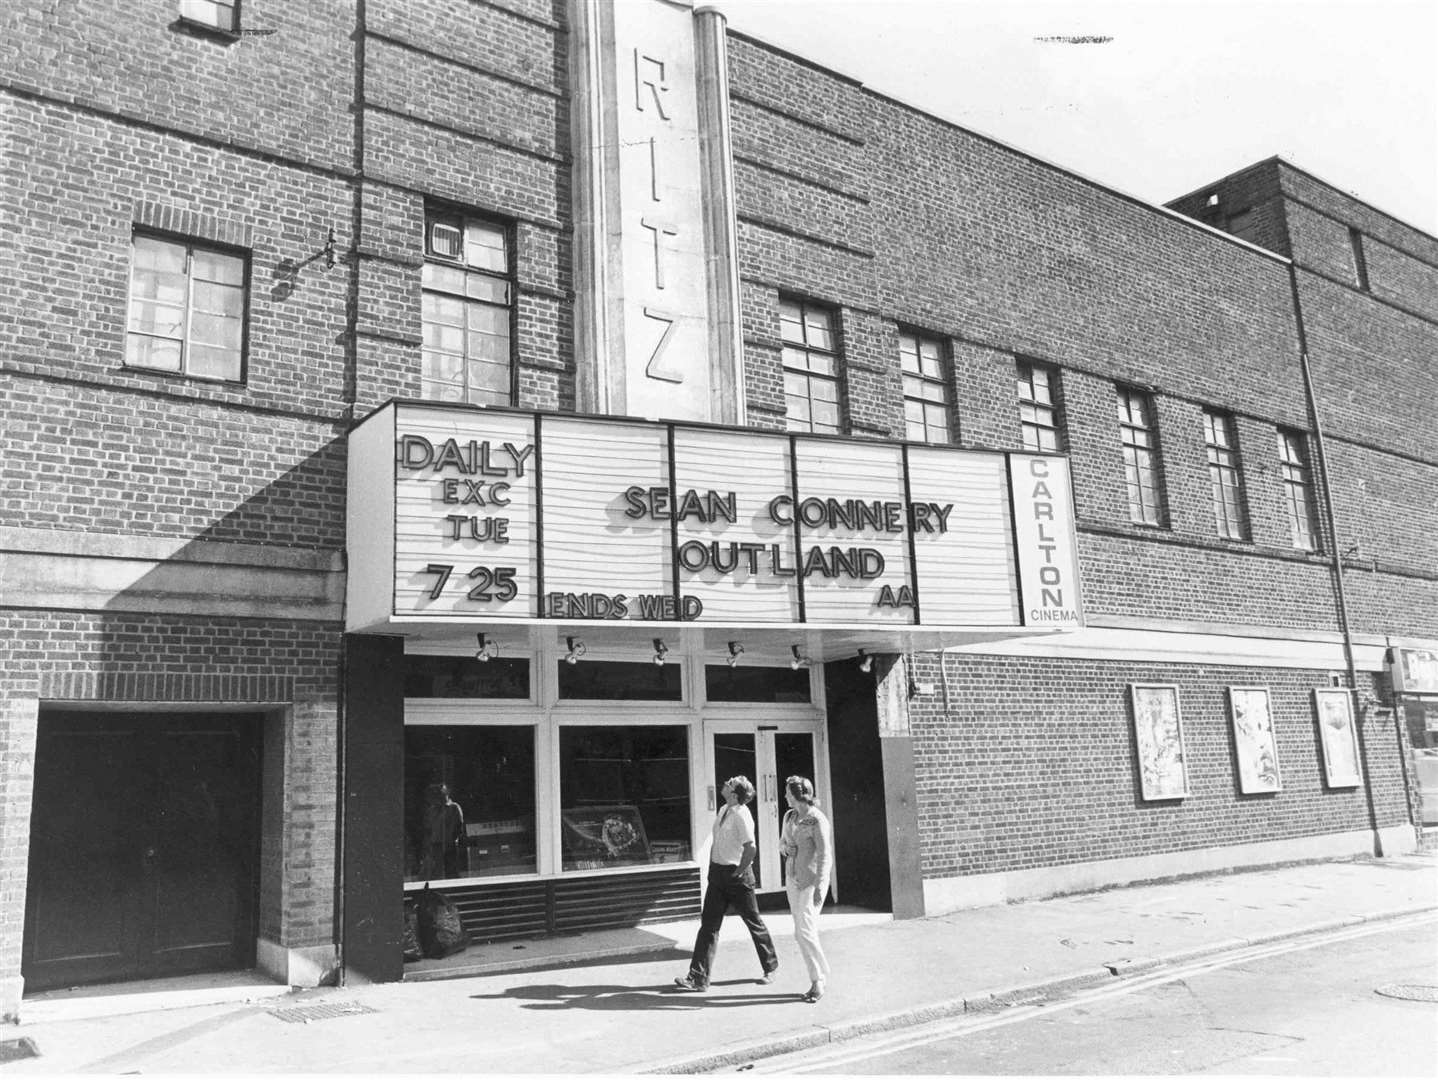 The Ritz cinema in Tonbridge, Kent, pictured in September, 1981. The tagline for sci-fi thriller Outland was "On Jupiter's moon, he's the only law..." It has a rating of 6.6 on IMDB.